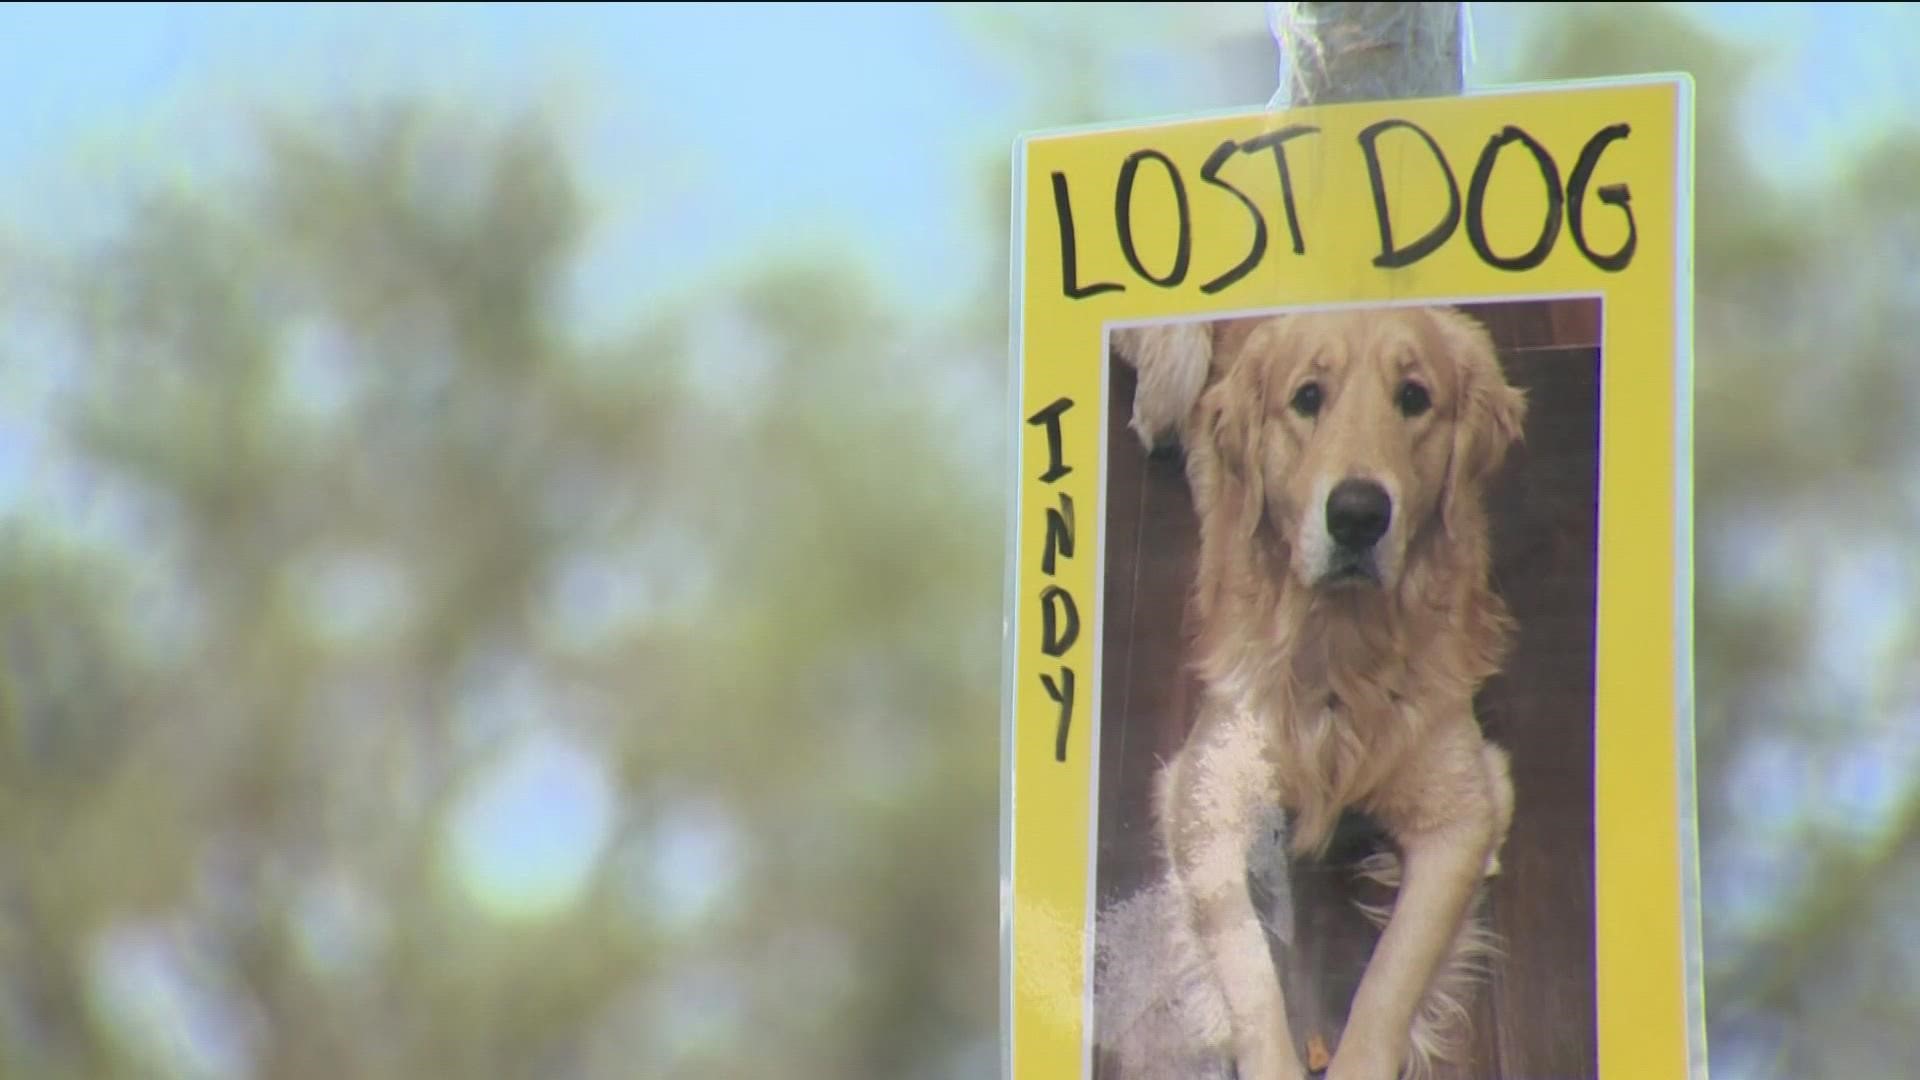 The sheriff's office said it is trying to determine a cause of death for the dog after it was found buried on the grounds of Lucki Dogs Resort.